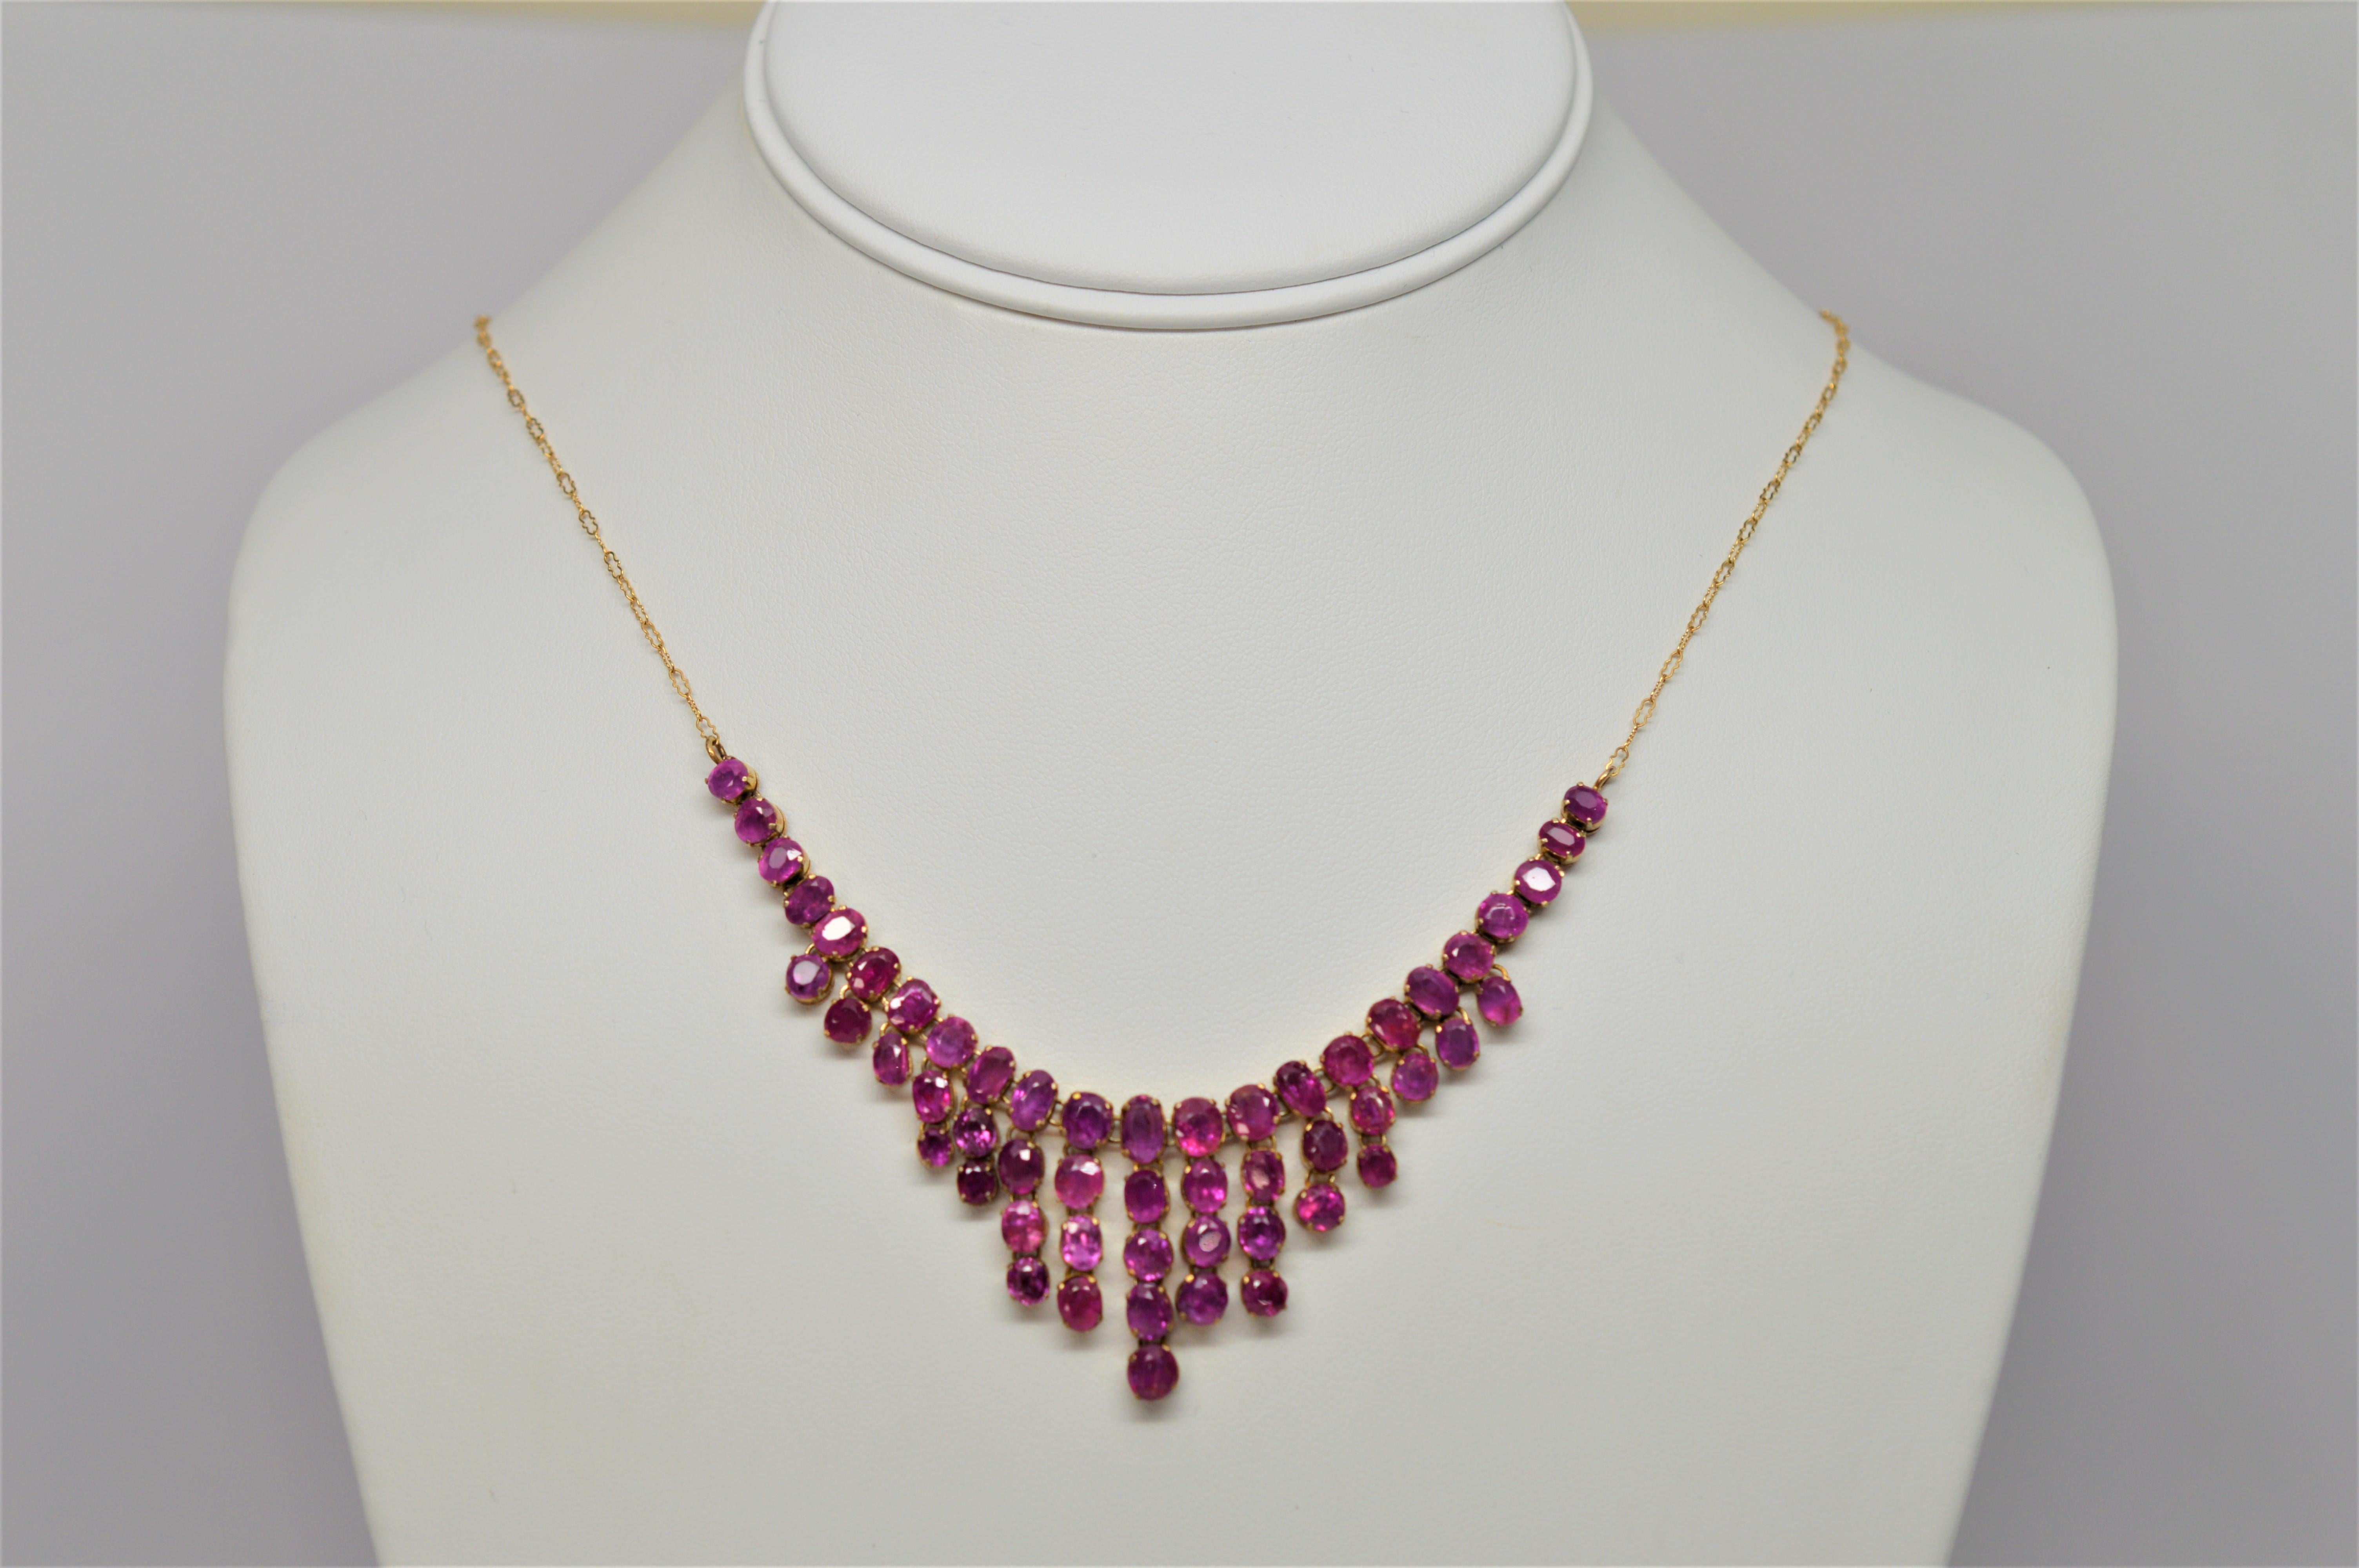 Dripping with gorgeous rose cut pink sapphires, this antique necklace evokes true femininity.  3-1/2 carats consisting of fifty three individually set potent pink sapphires in 10 karat yellow gold demonstrate warmth and compassion and span